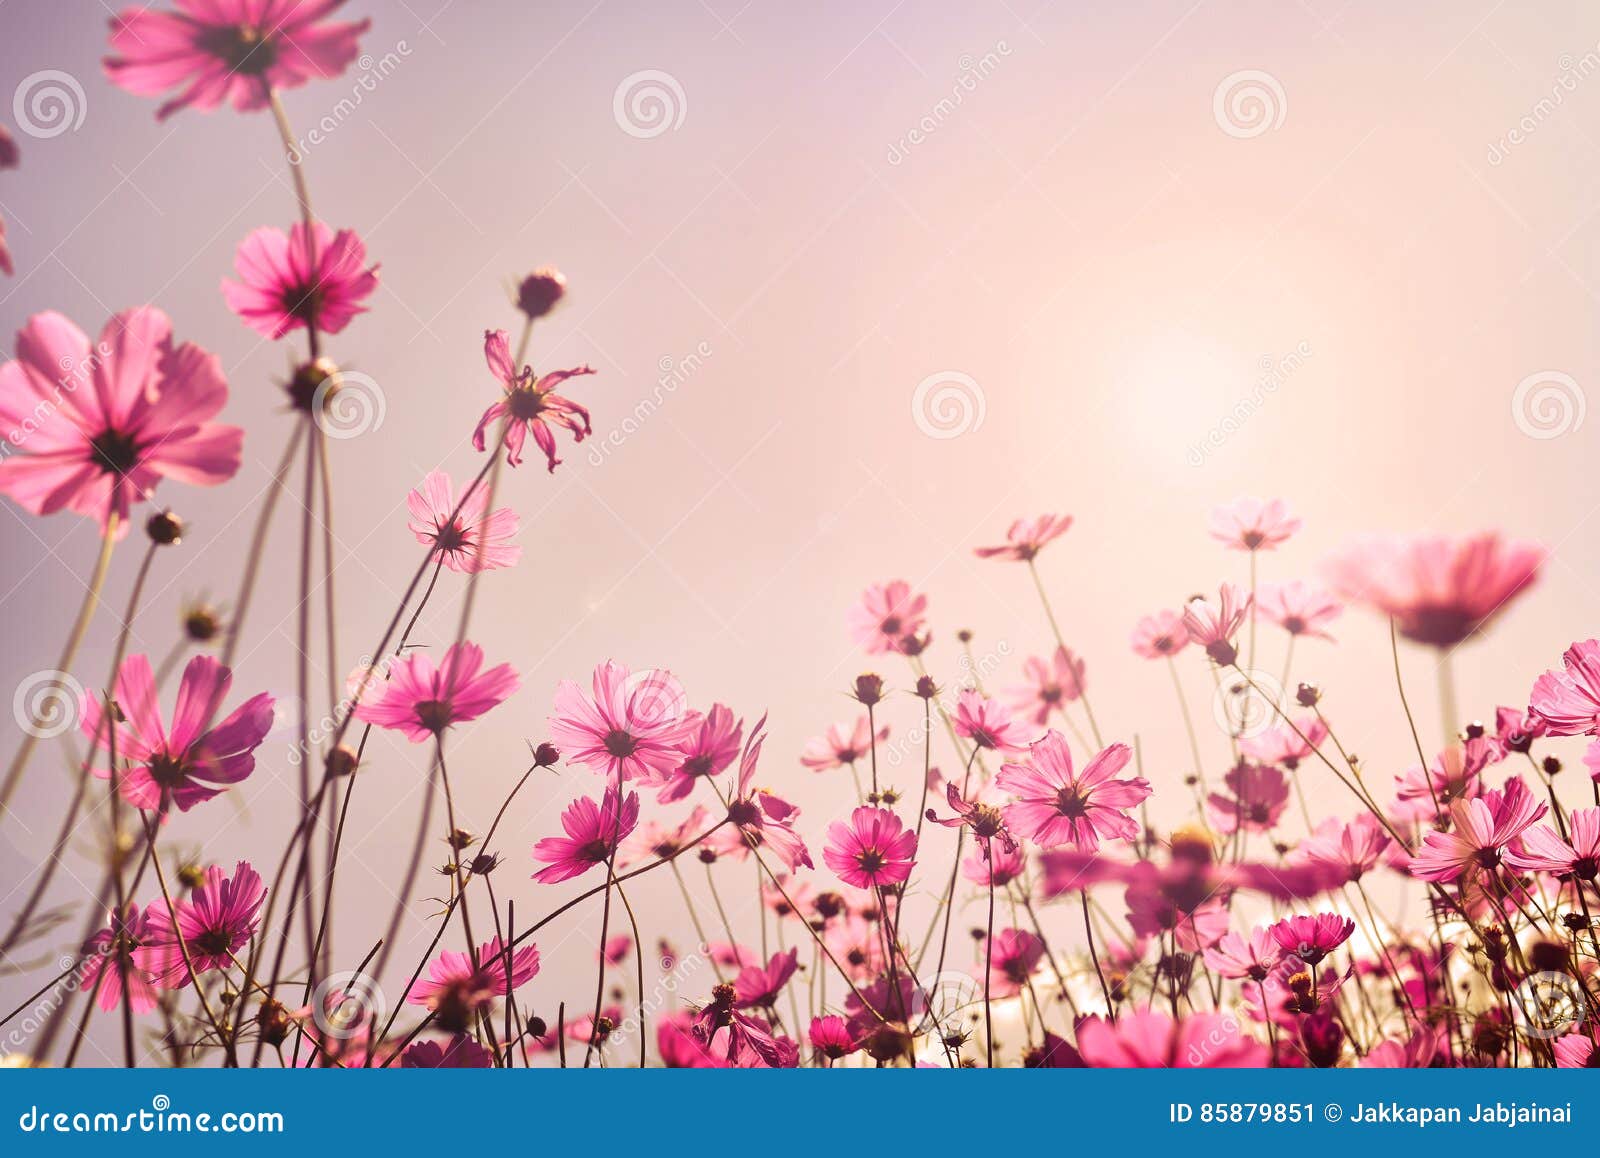 pink tone of cosmos flower field